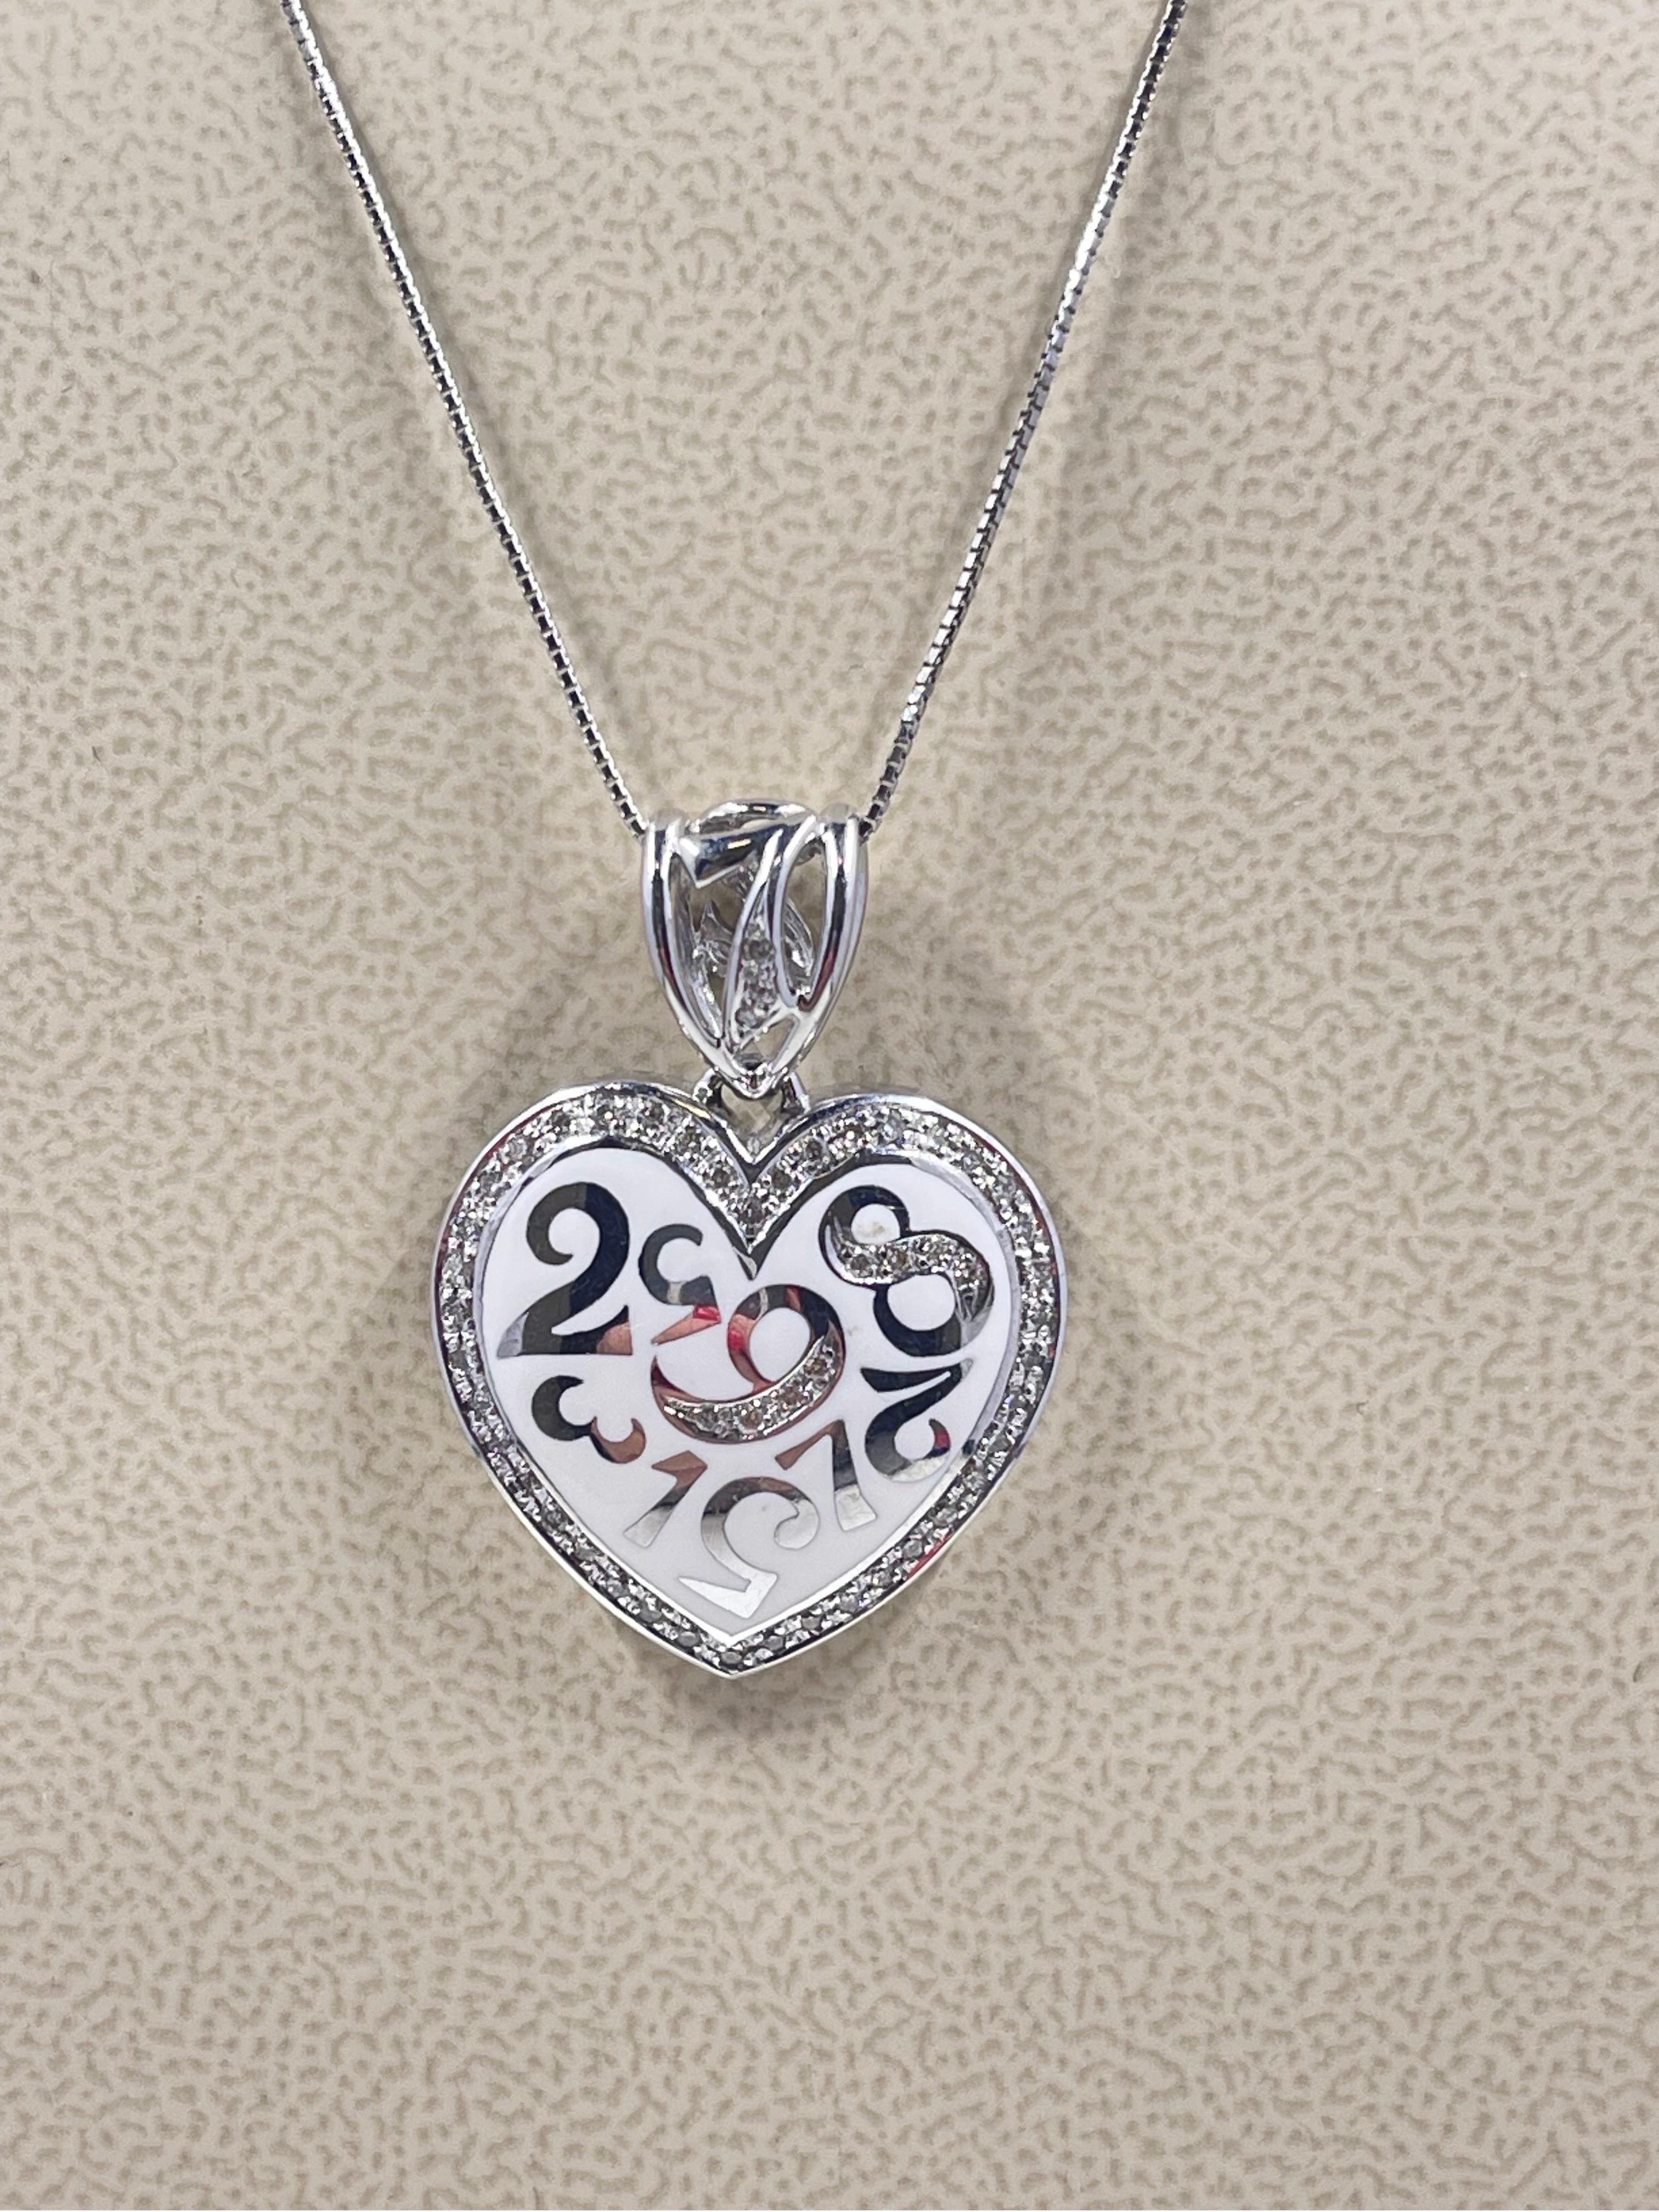 Women's Diamond And White Enamel Heart Necklace In 148k White Gold  For Sale